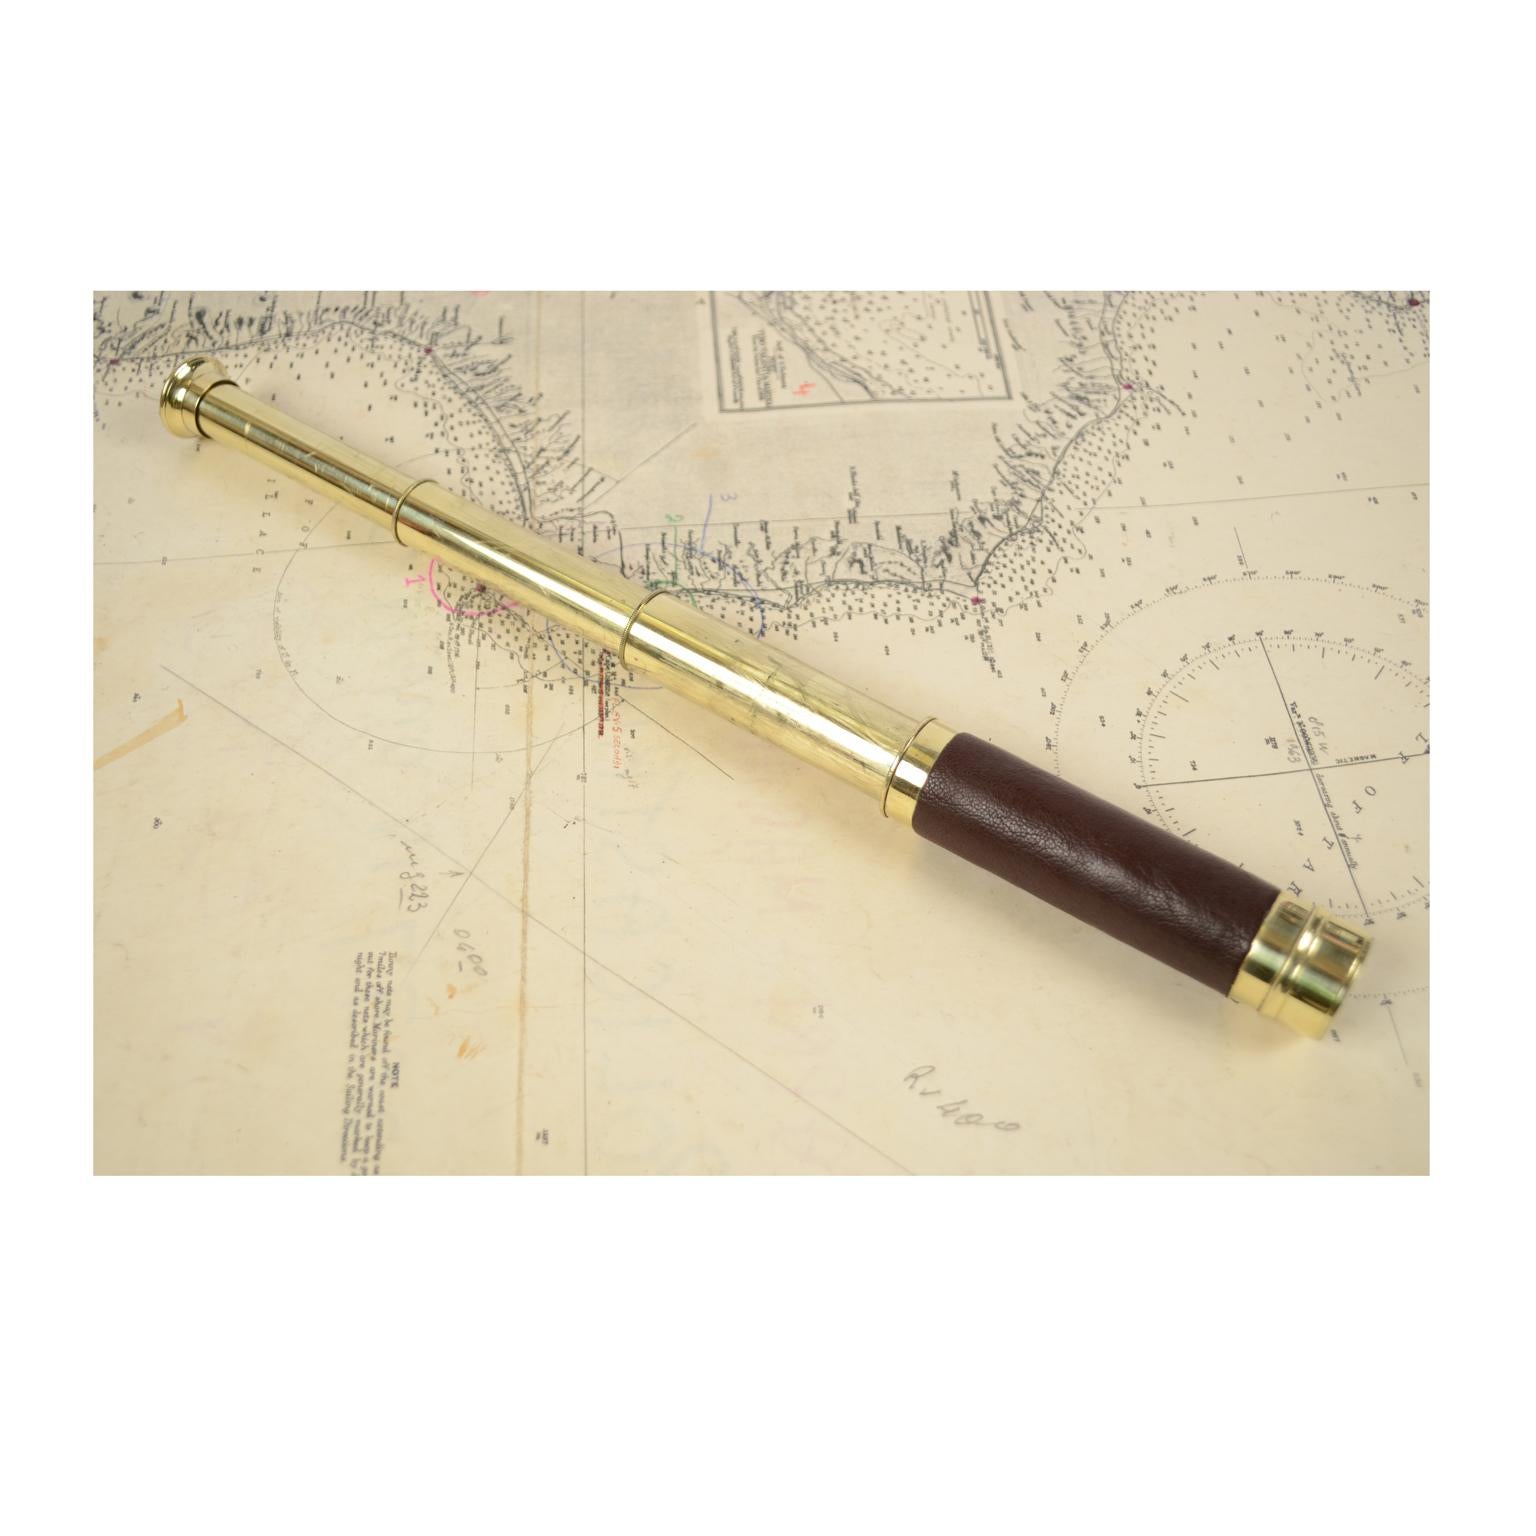 Small brass telescope with leather-covered handle, focusing with three extensions. Maximum length 34.5 cm, minimum 12 cm, focal diameter 2.5 cm. With wooden and brass base.
Shipping insured by Lloyd's London; it is available our free gift box (look